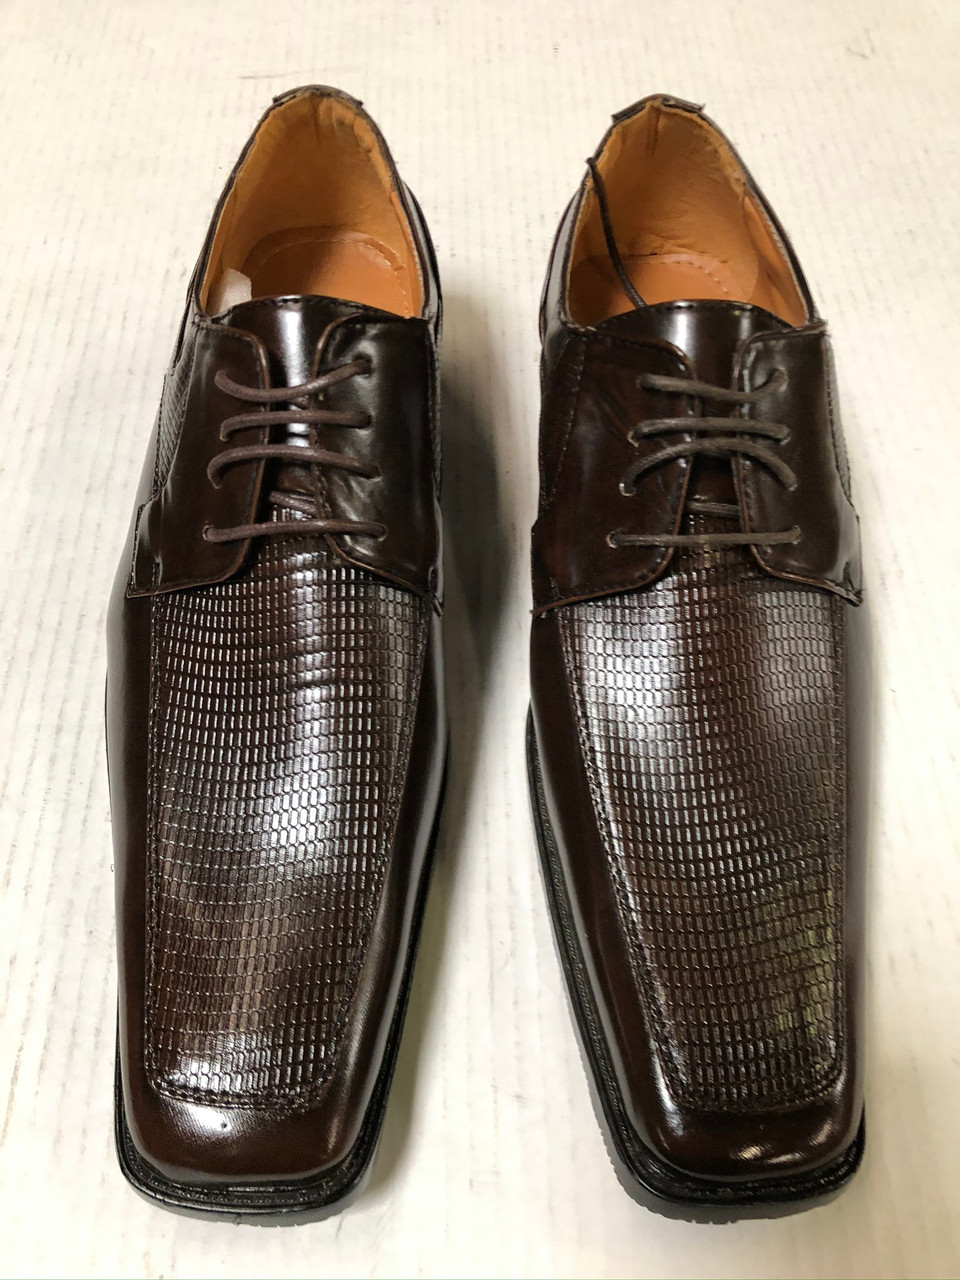 ULTIMATE* Men's Brown Checkered Pointed Exotic Dress Shoes FREE SHIPPING -  SZ 10 - Penny Suits